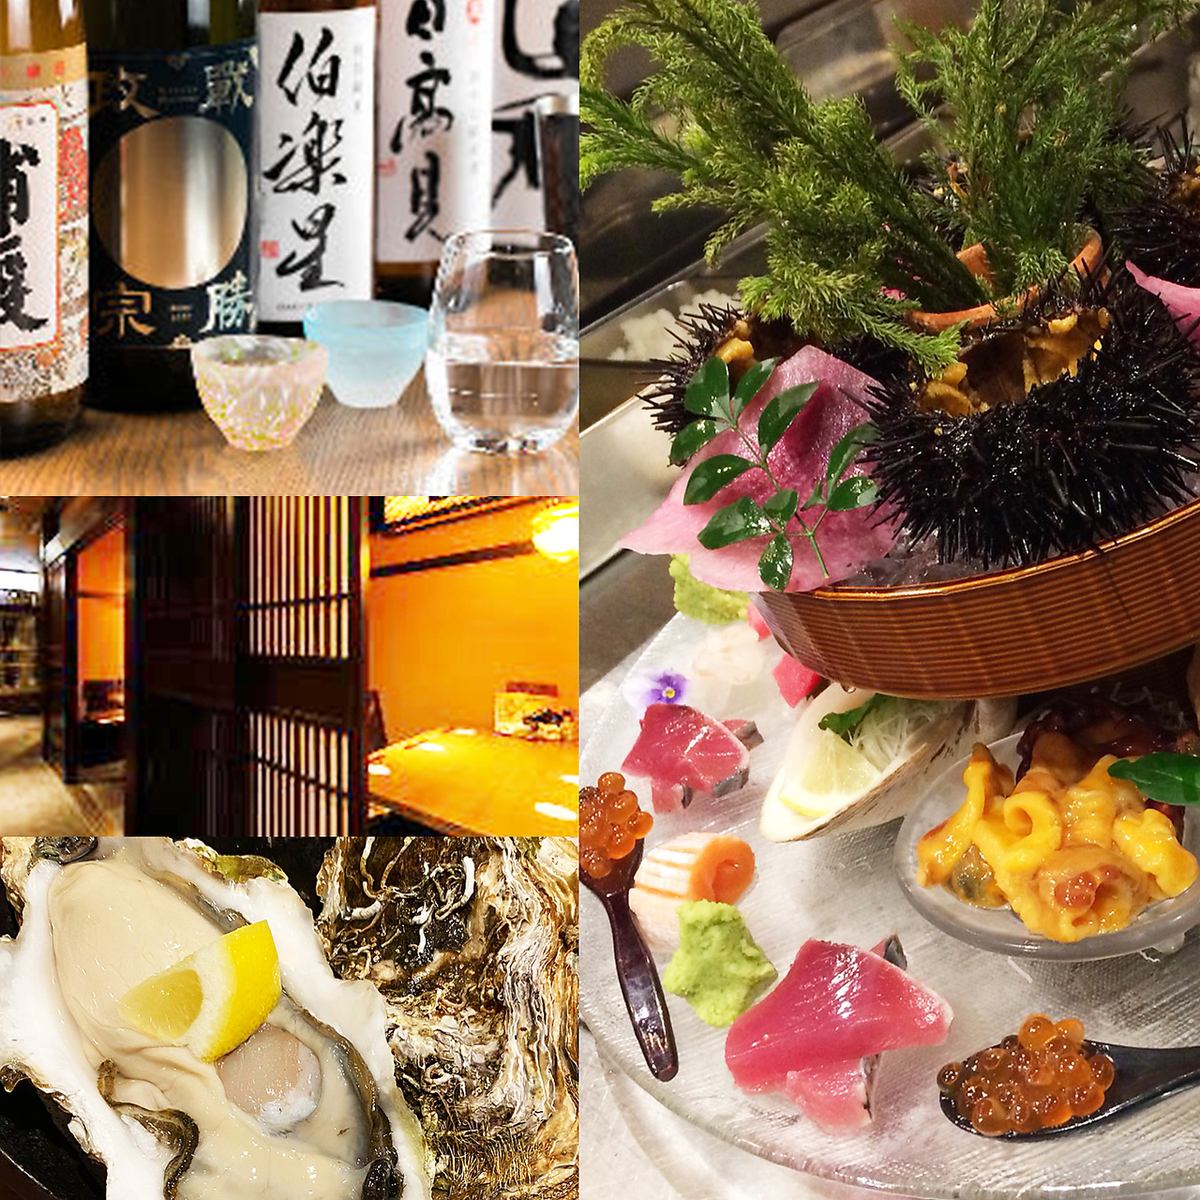 An authentic Japanese izakaya where you can enjoy fresh seafood and vegetables from the Miyagi suburbs in a calm, mature atmosphere.